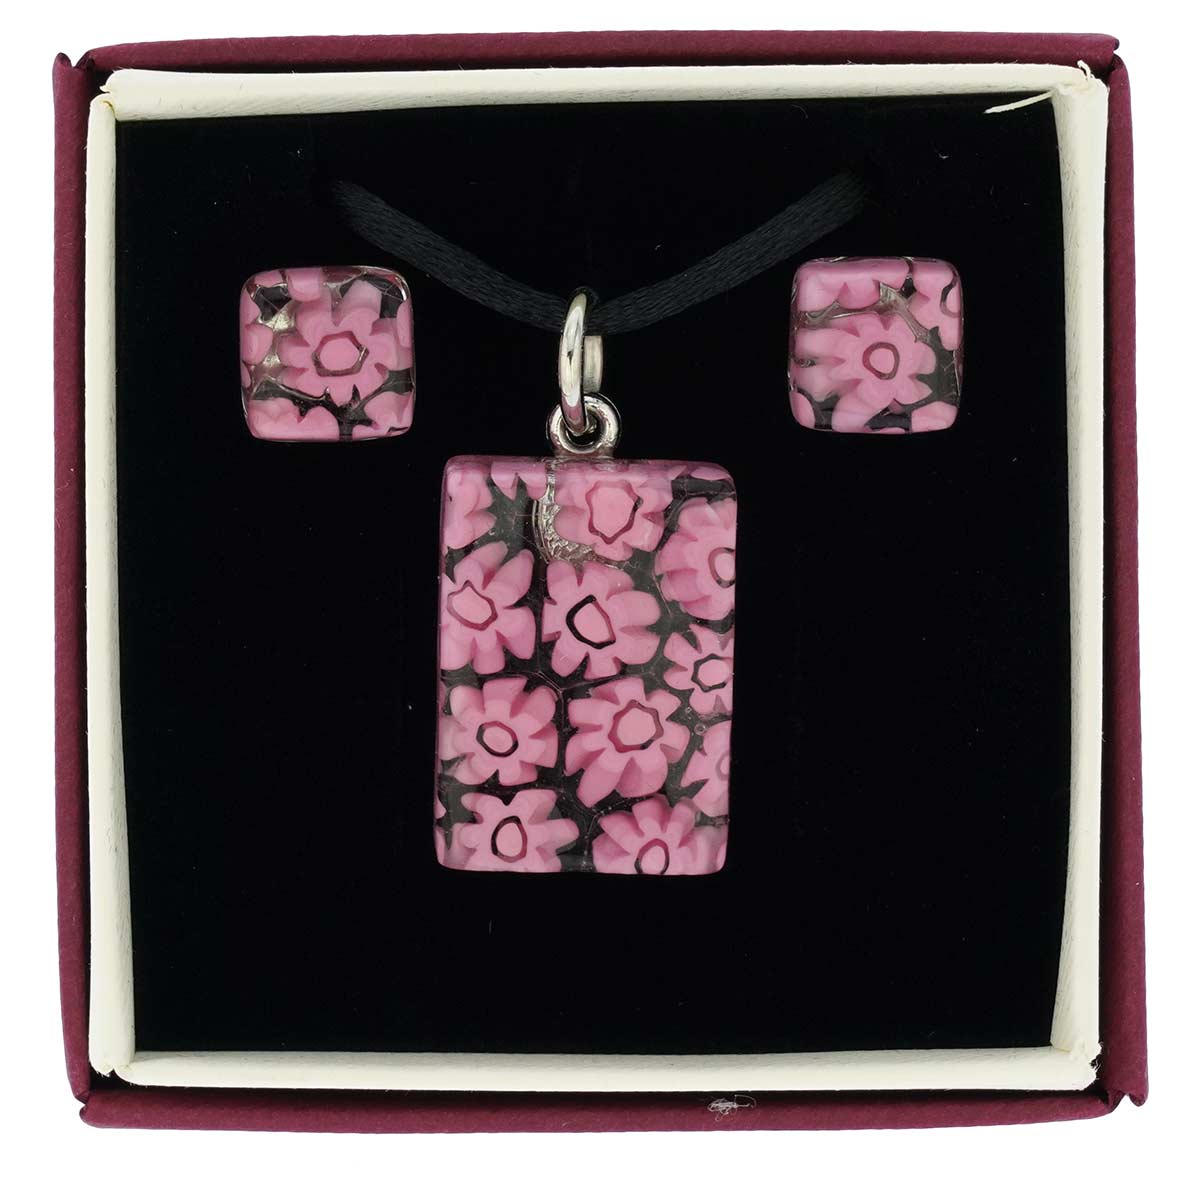 Murano Glass Millefiori Necklace and Earrings Set - Pink